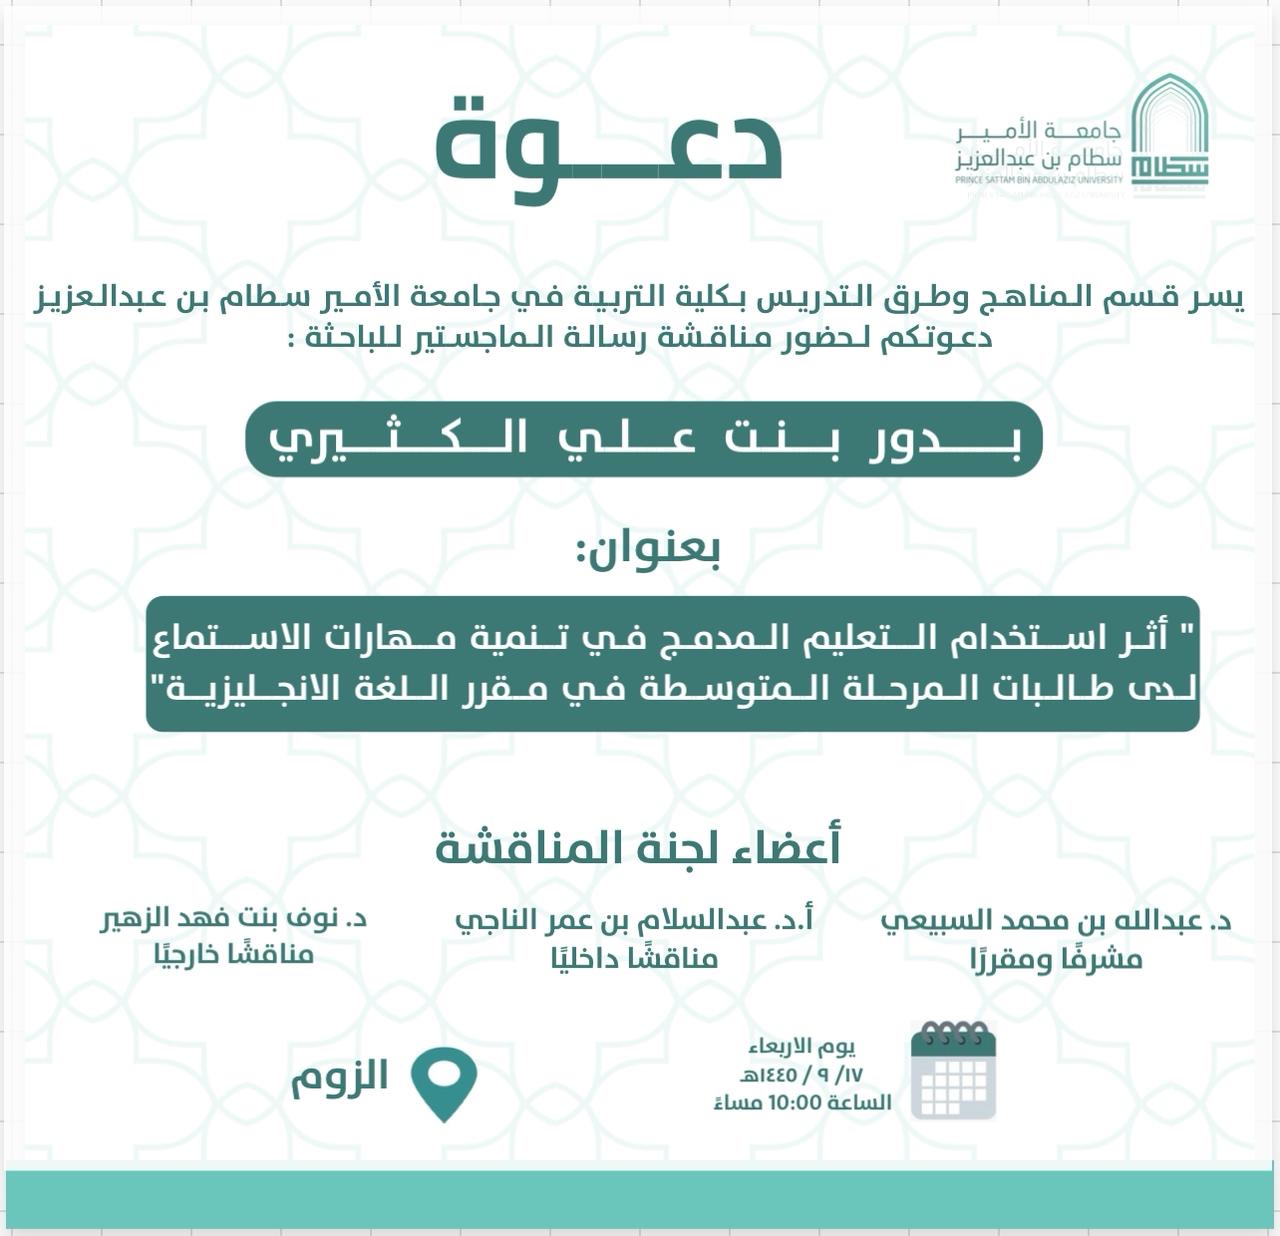 The Department of Curriculum and Instruction is pleased to invite you to attend the discussion of the master’s thesis by researcher: Bodour  Ali Al-Kathiri: “The effect of using blended learning in developing the listening skills of middle school female students in the English language course” on Wednesday 9/17 at 10 pm *Zoom.